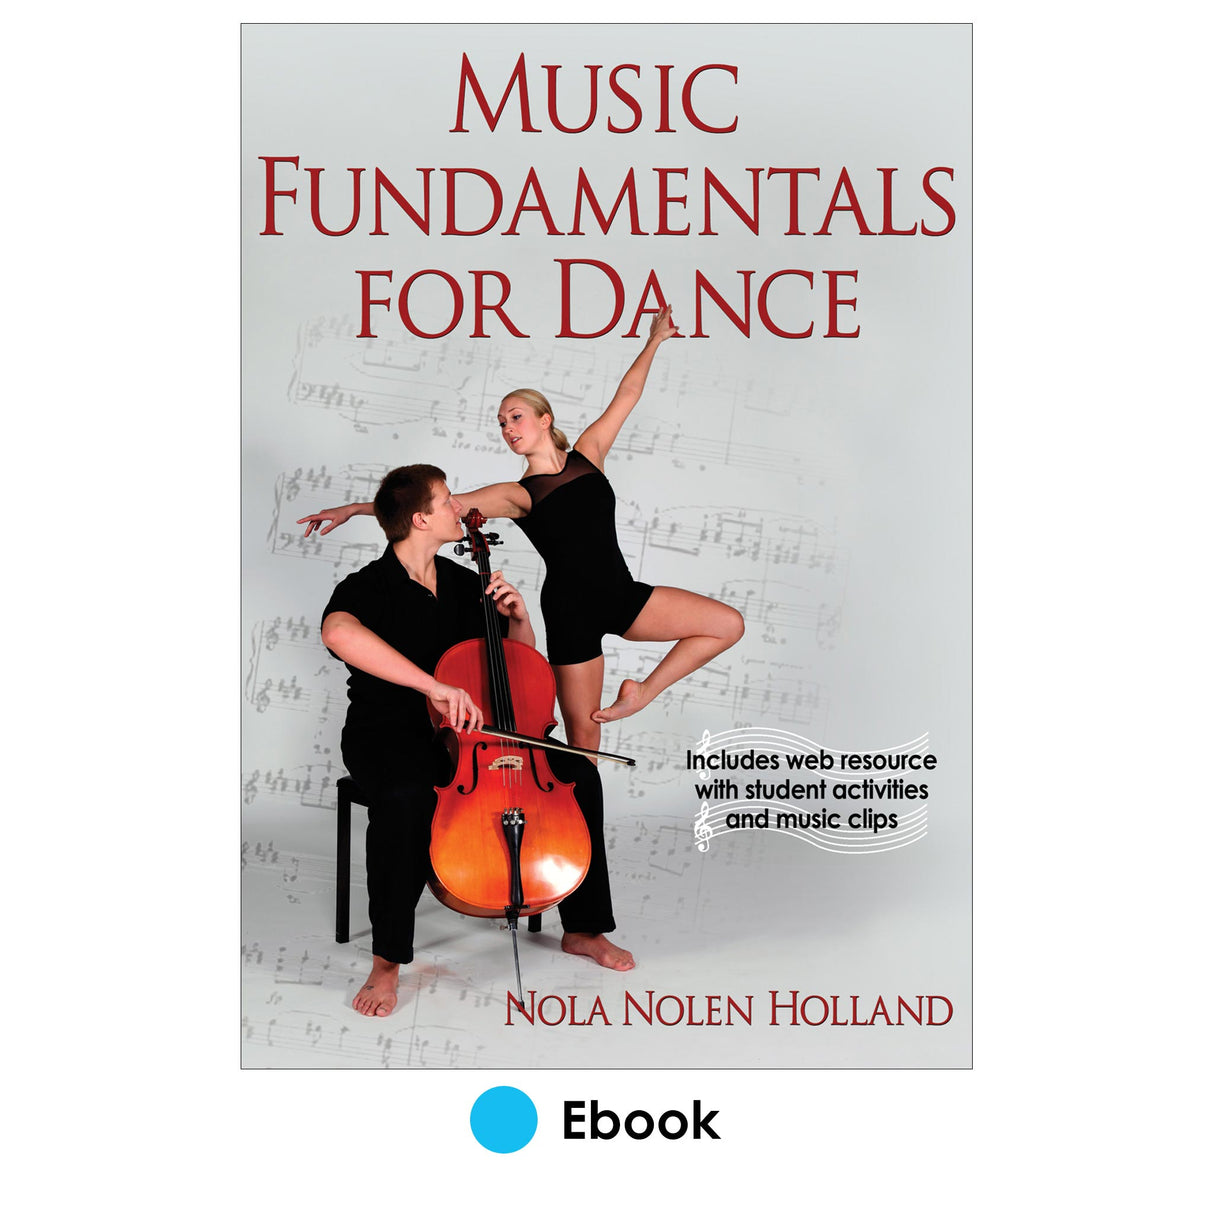 Music Fundamentals for Dance PDF With Web Resource